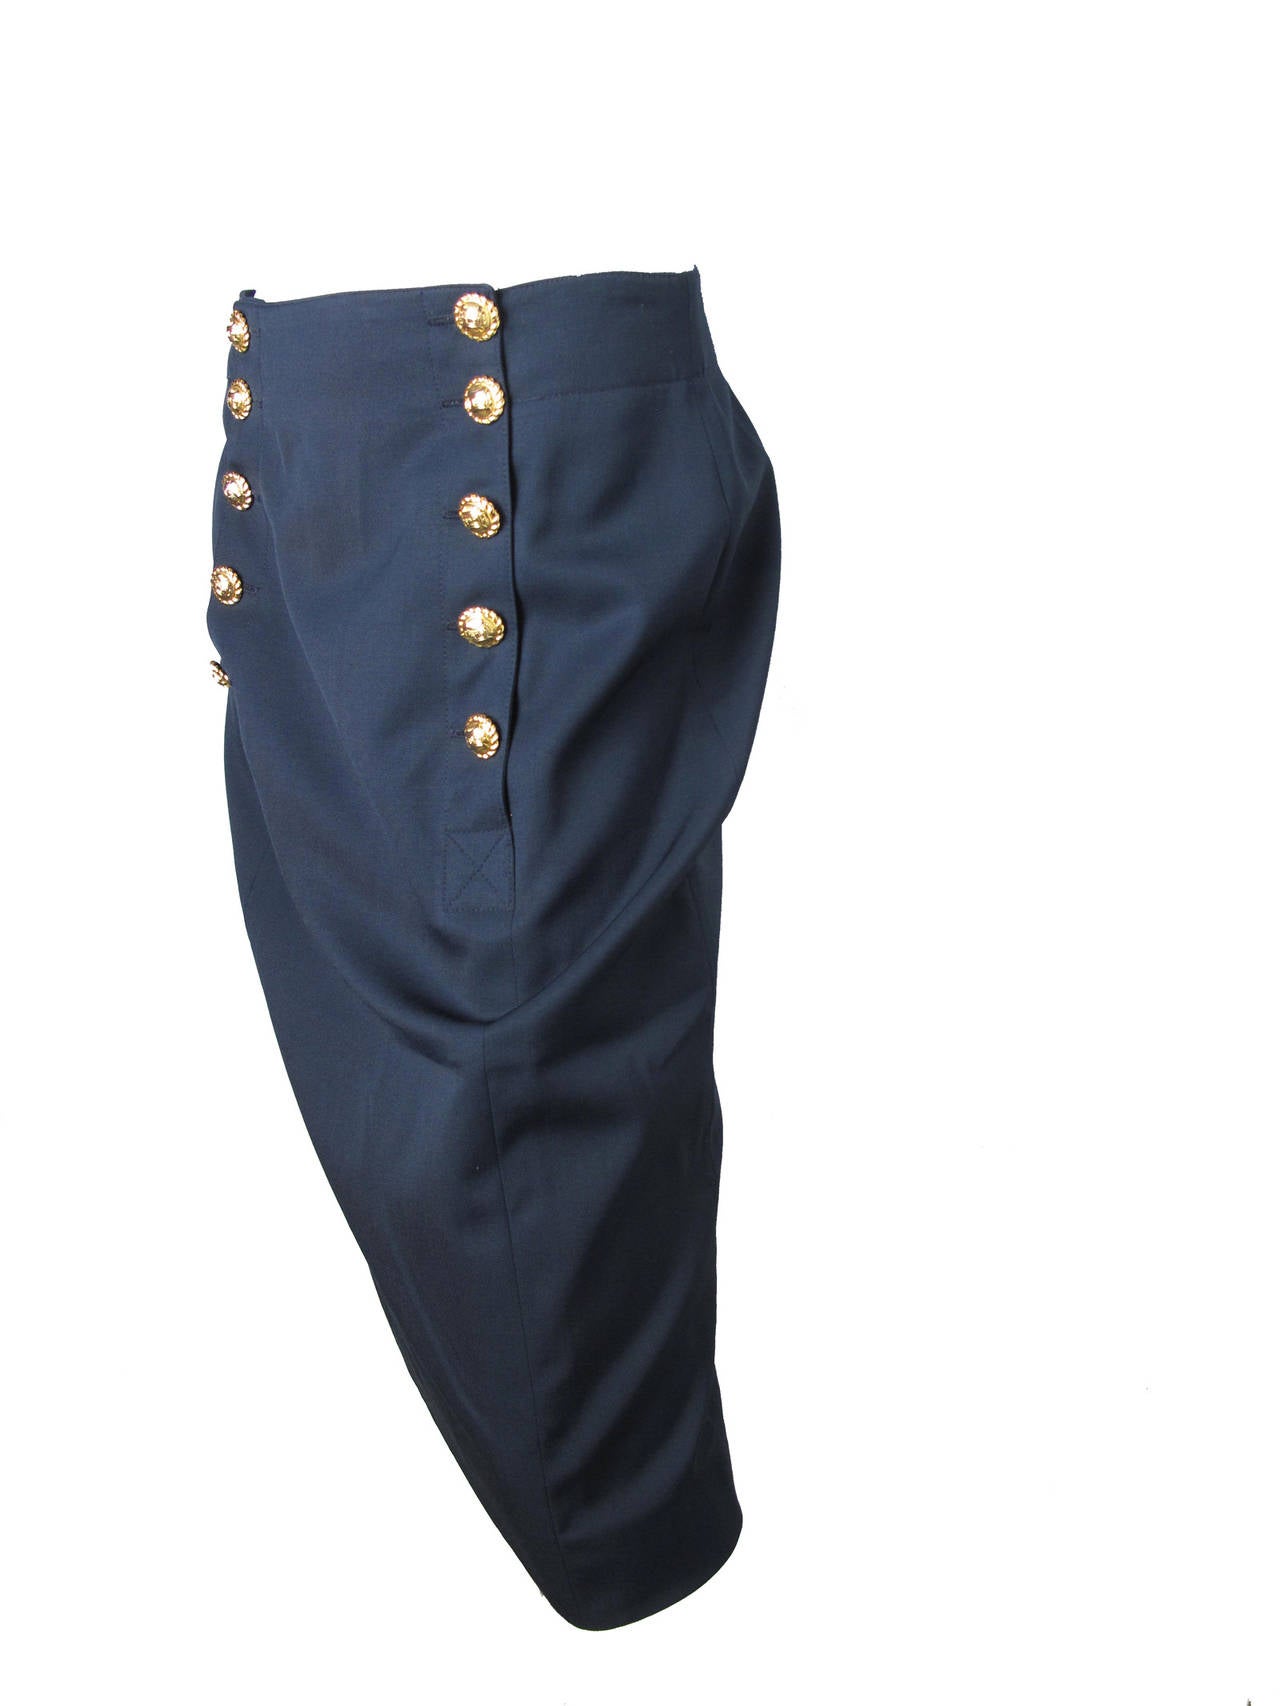 1970s Celine navy wool skirt with button detailing down front.  Made in France.

Condition: Excellent. Size 46

29